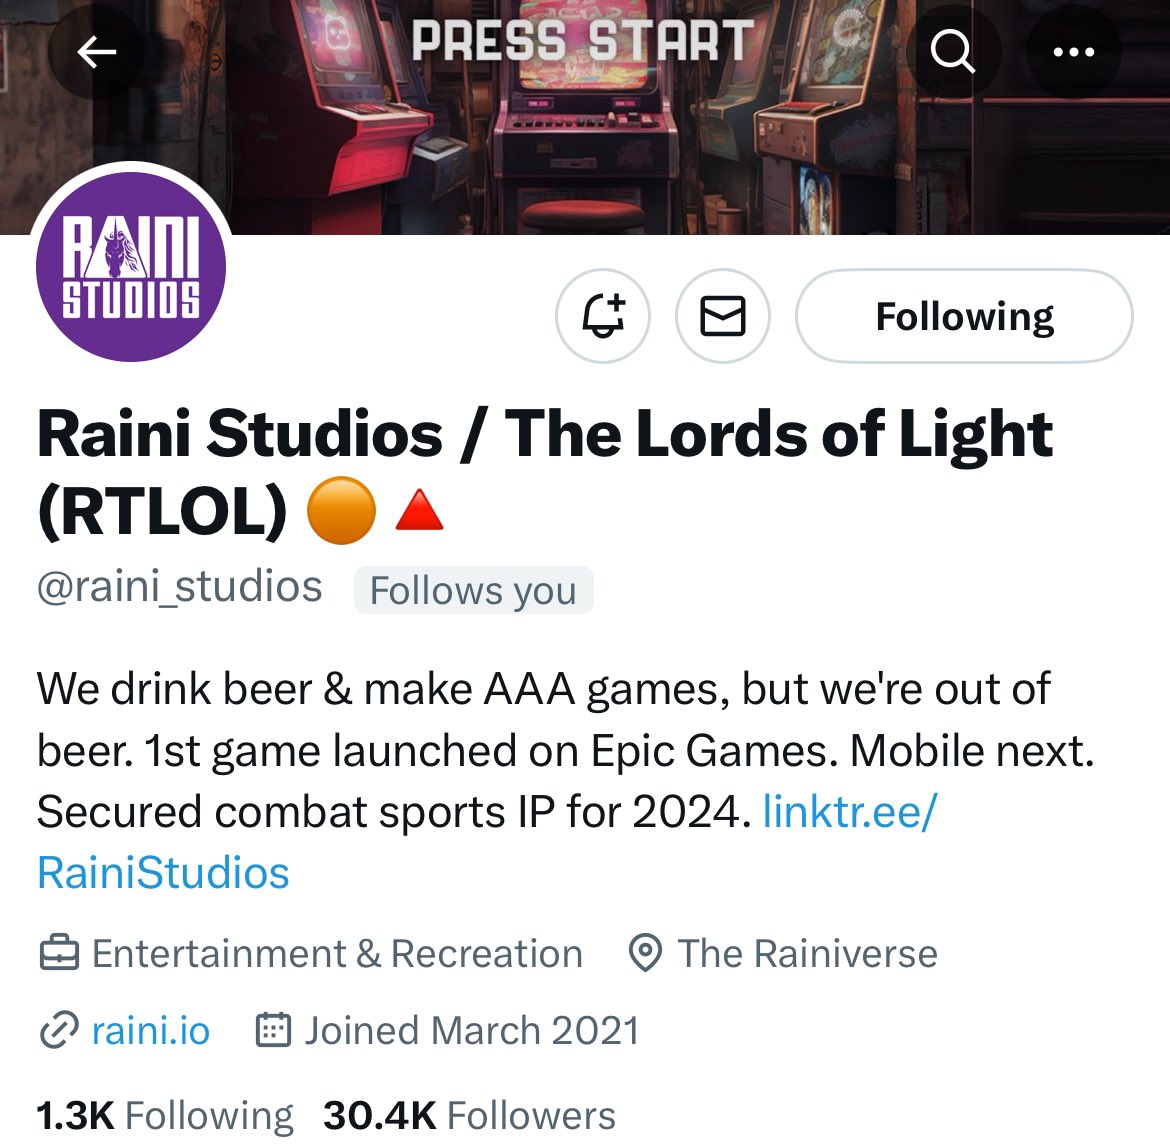 Please be advised we have rebranded the Twitter handle for Raini Studios from @raini_coin to @Raini_Studios This has resulted in the temporarily loss of our blue check so please be vigilant with fake accounts. In addition please begin using the new handle in tags.